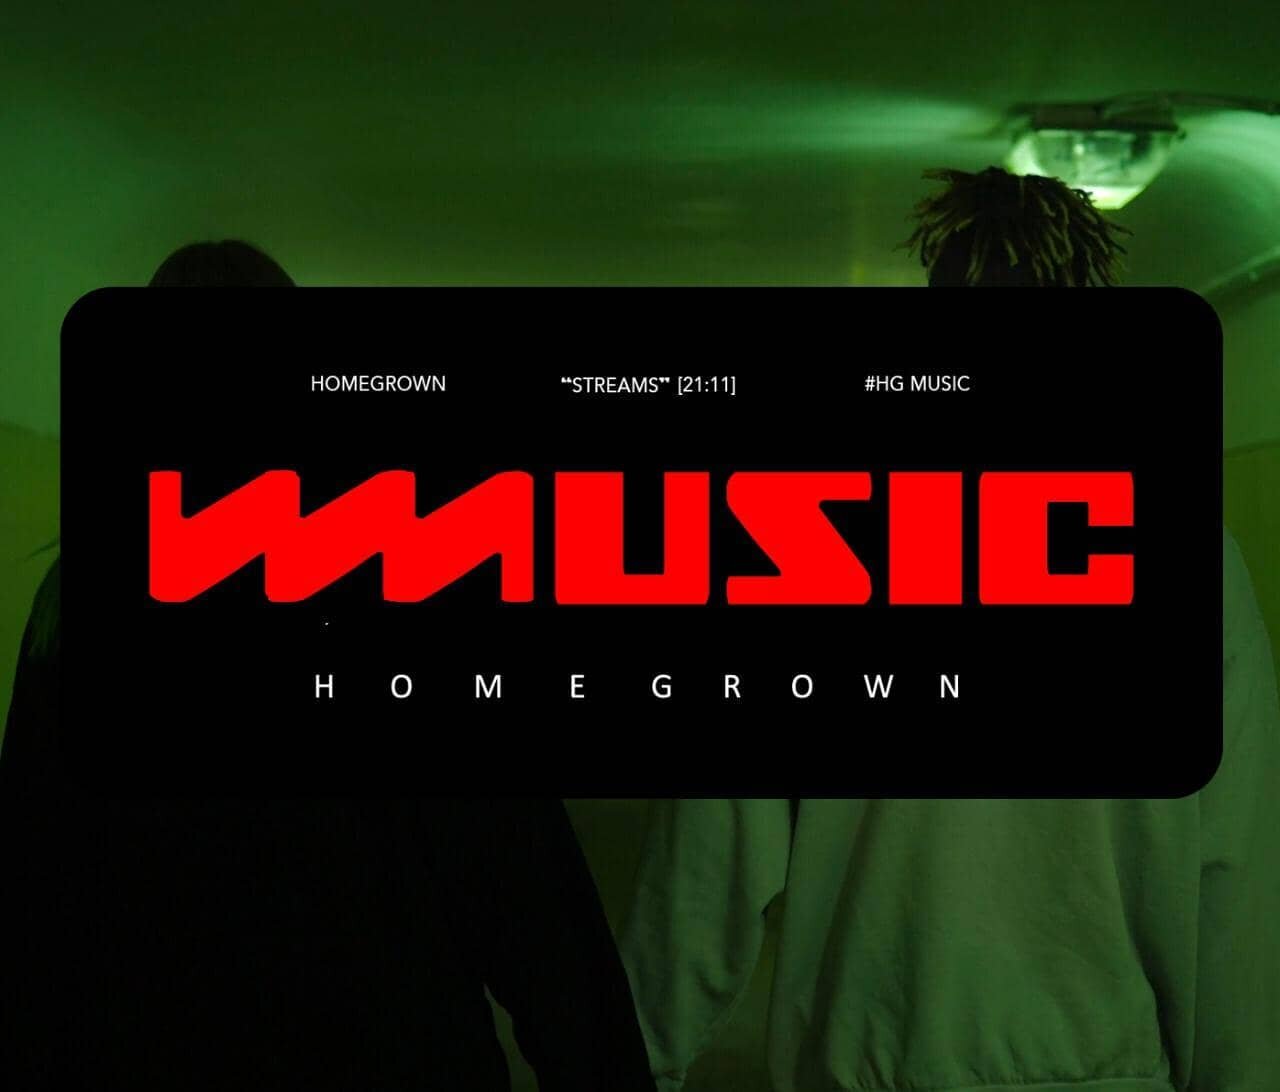 South Asia's music discovery platform @homegrowninmusic coming soon // #HGMusic - All things @homegrownin .
.
.
#Homegrown #Music #SouthAsia #India